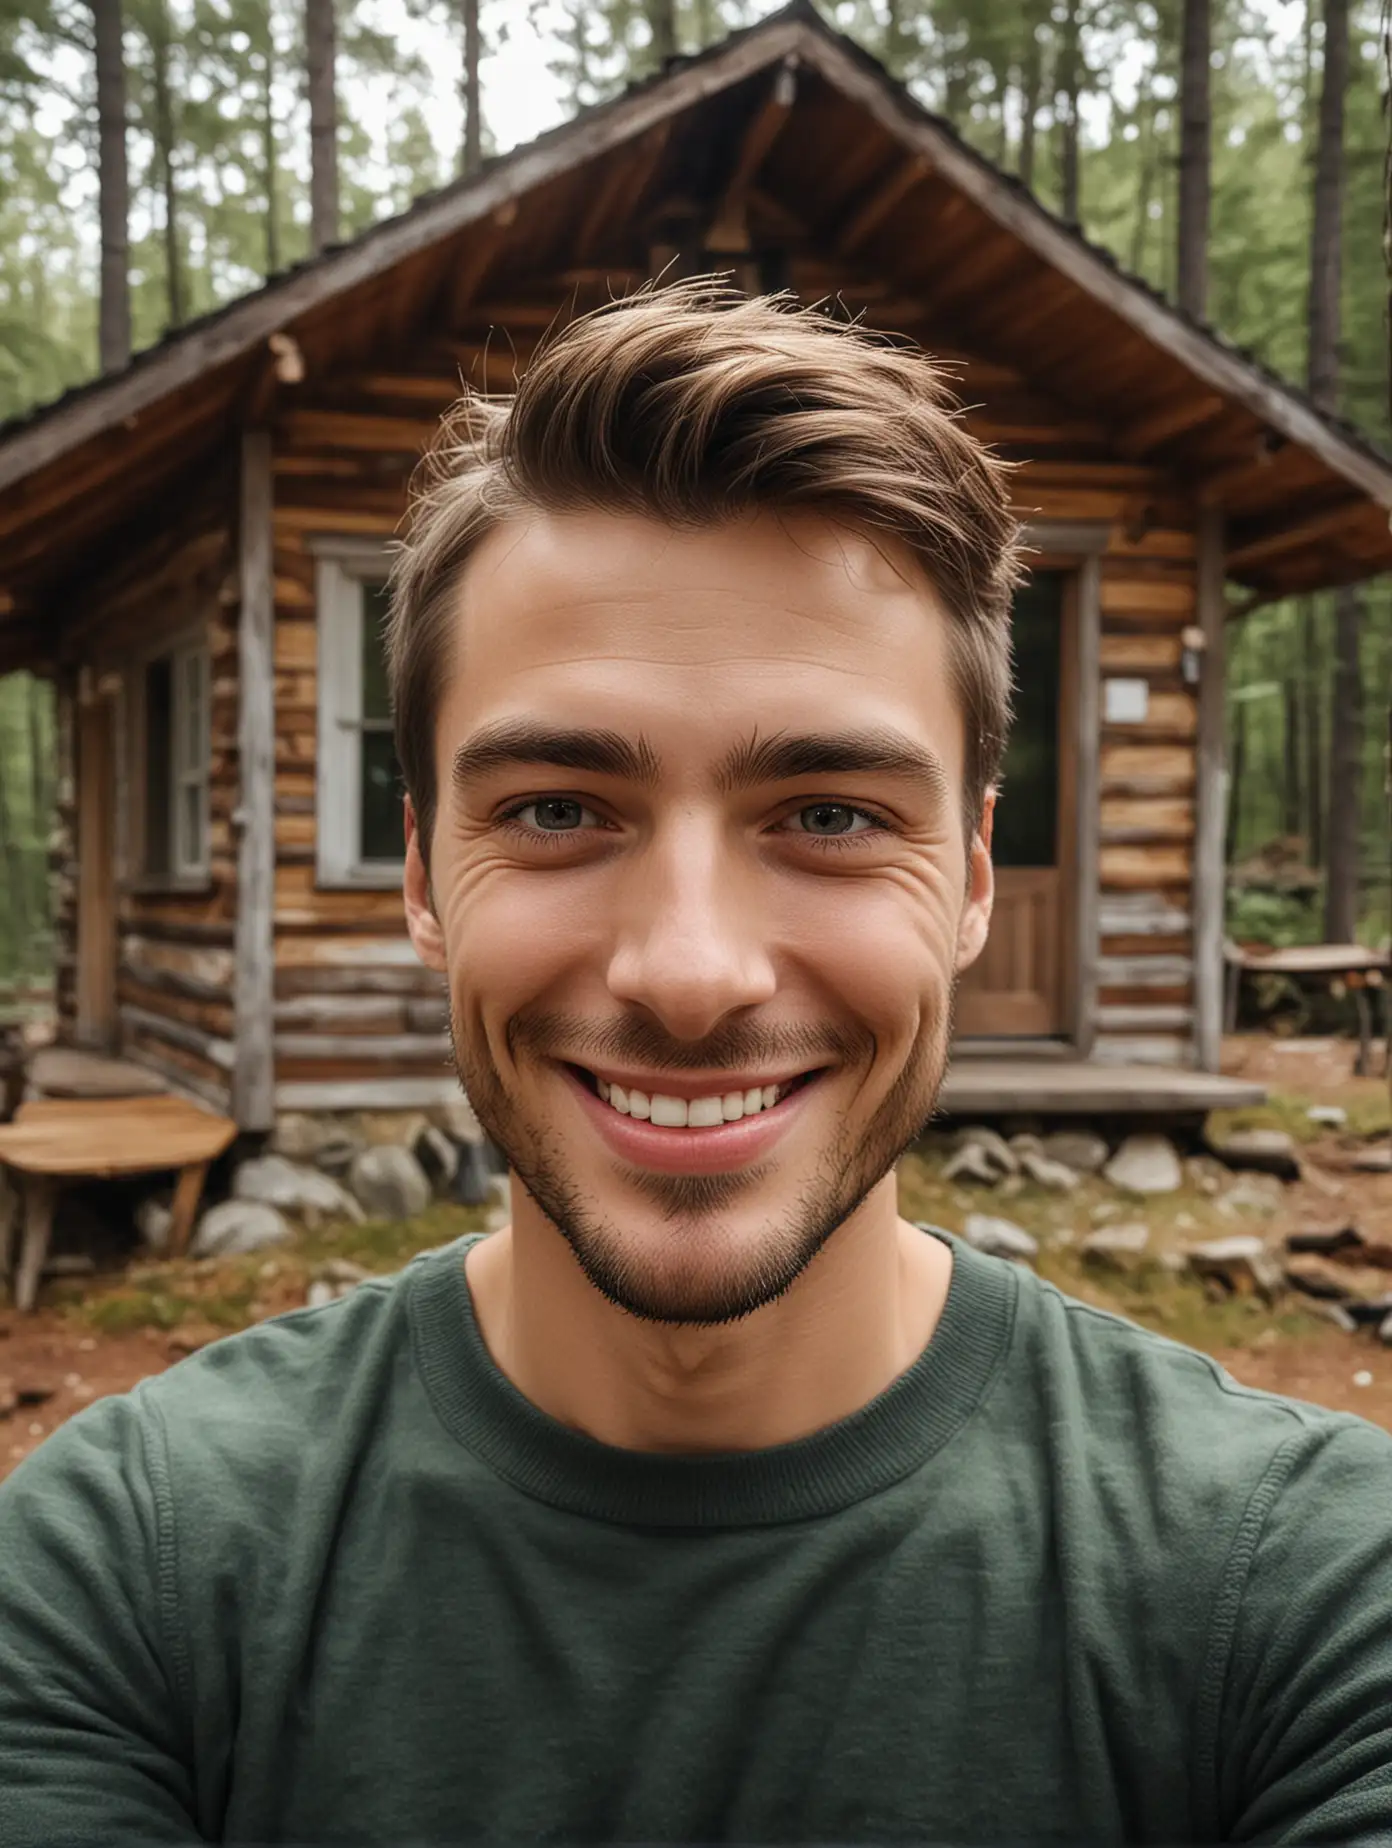 The handsome guy takes a photo with the cabin in the forest where she lives, smiling at the camera, with delicate facial features,